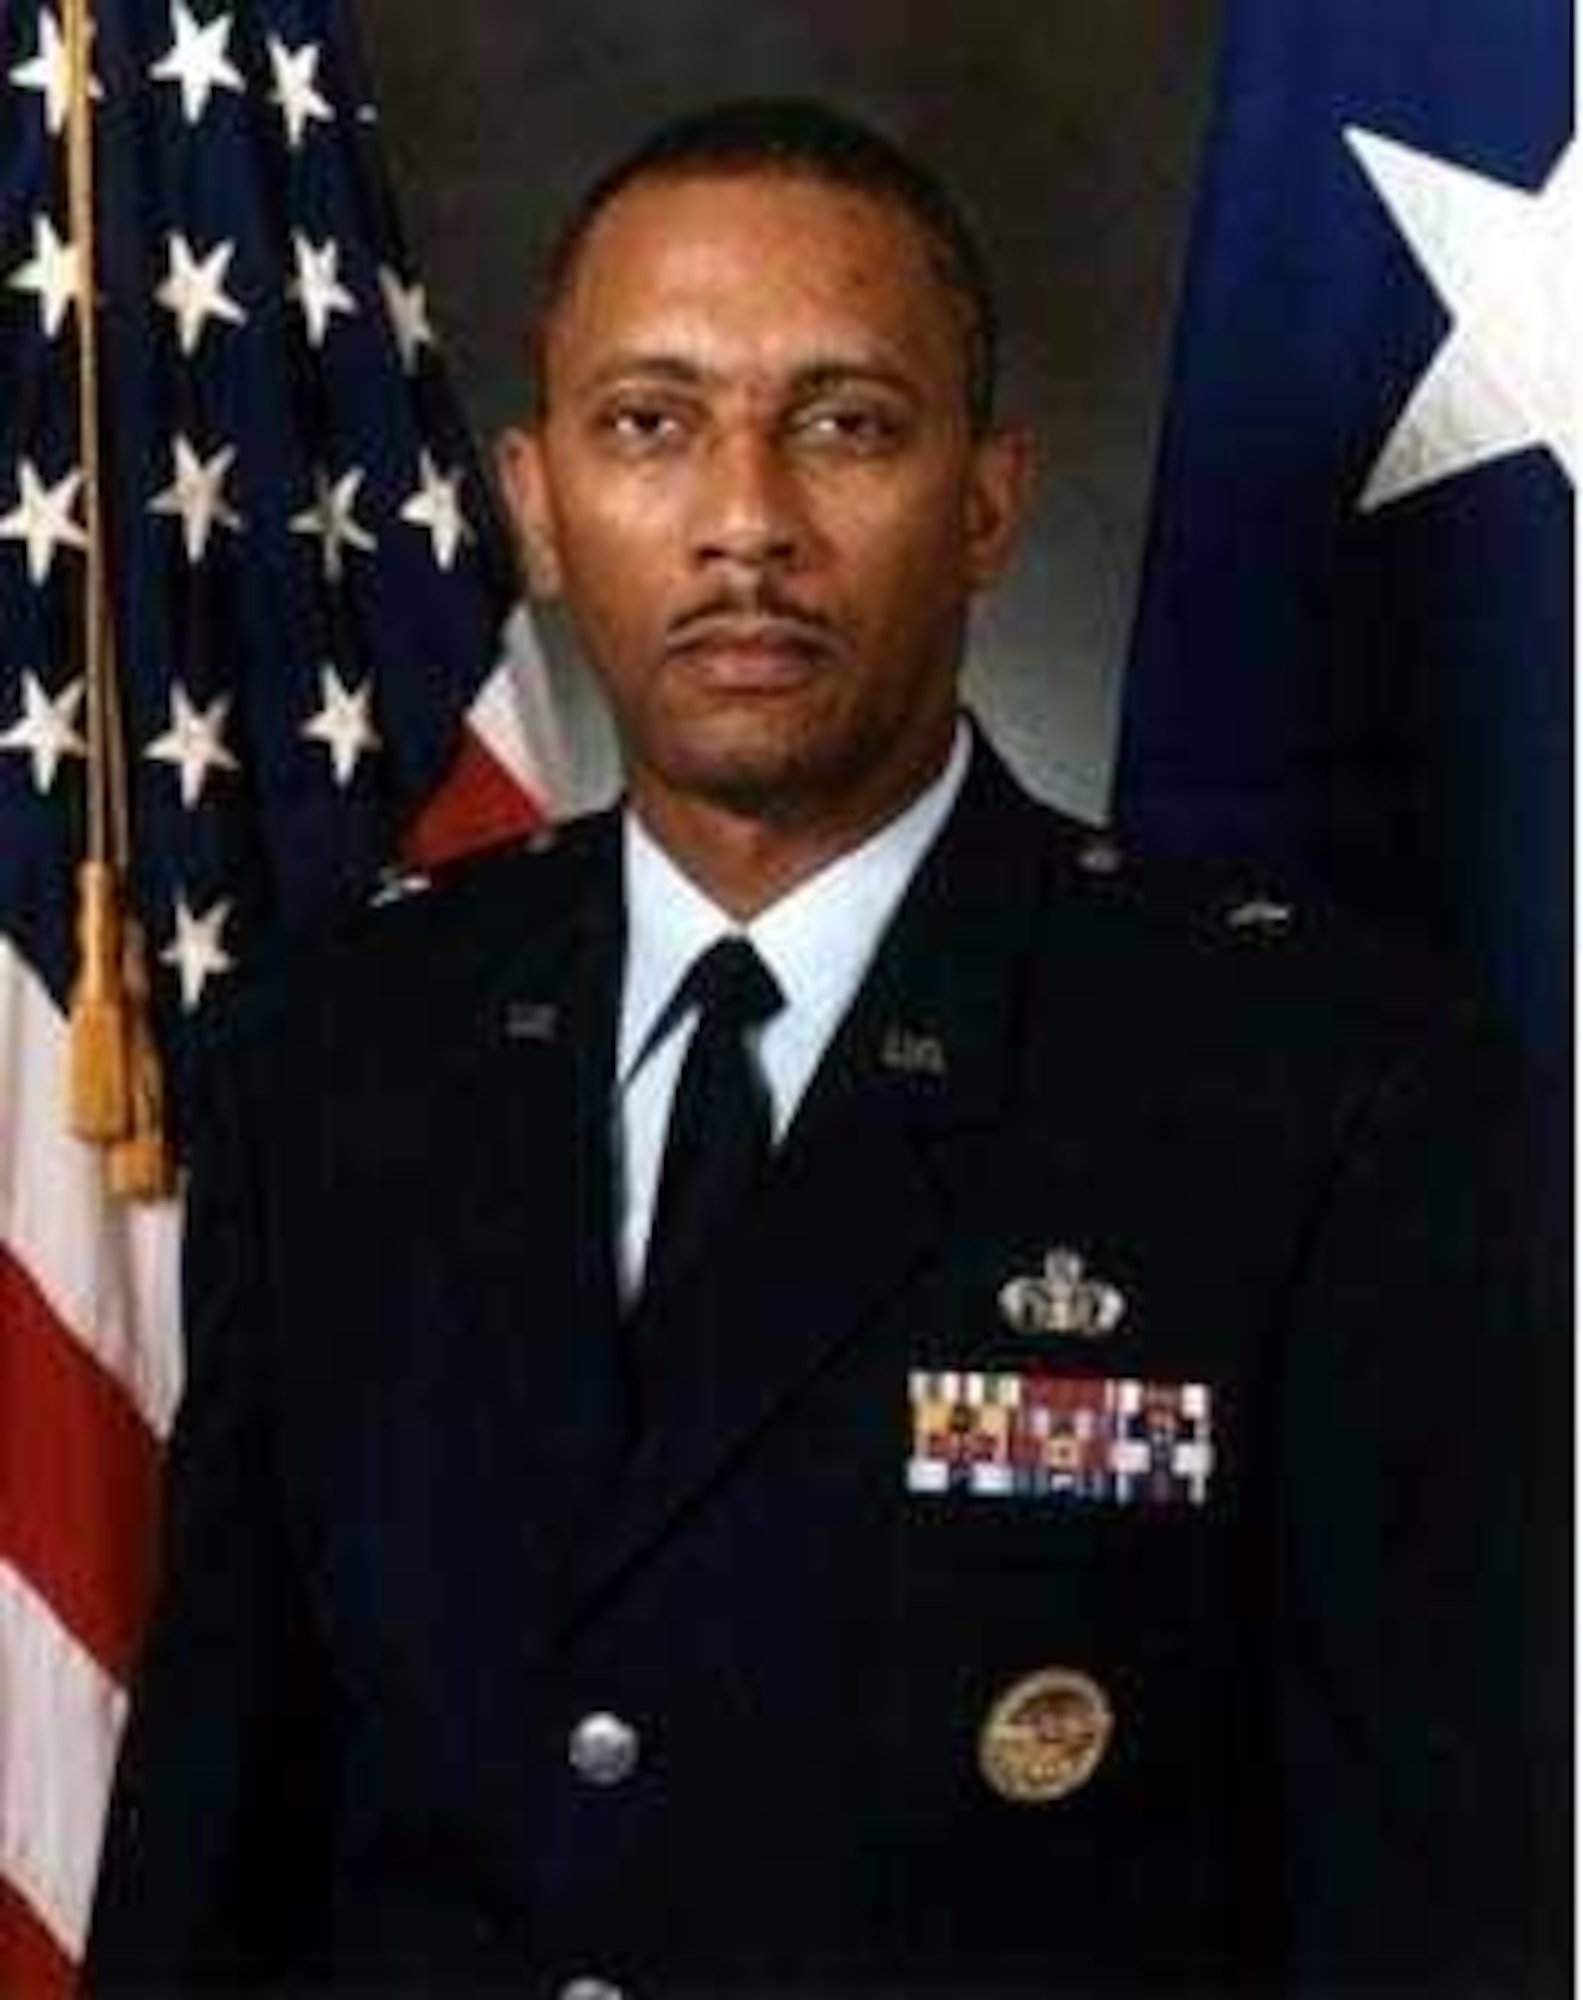 Then Capt. Francis X. Taylor, represented the Office of Special Investigations in Exercise BRIGHT STAR 82 by partnering with the base security forces contingent, serving as an observation and assessment expert for activity outside the confines of the base, plus as an advisor for anything inside the base. Brig. Gen. Francis X. Taylor was the 13th Commander of OSI from 1996-2001.  (U.S. Air Force photo)